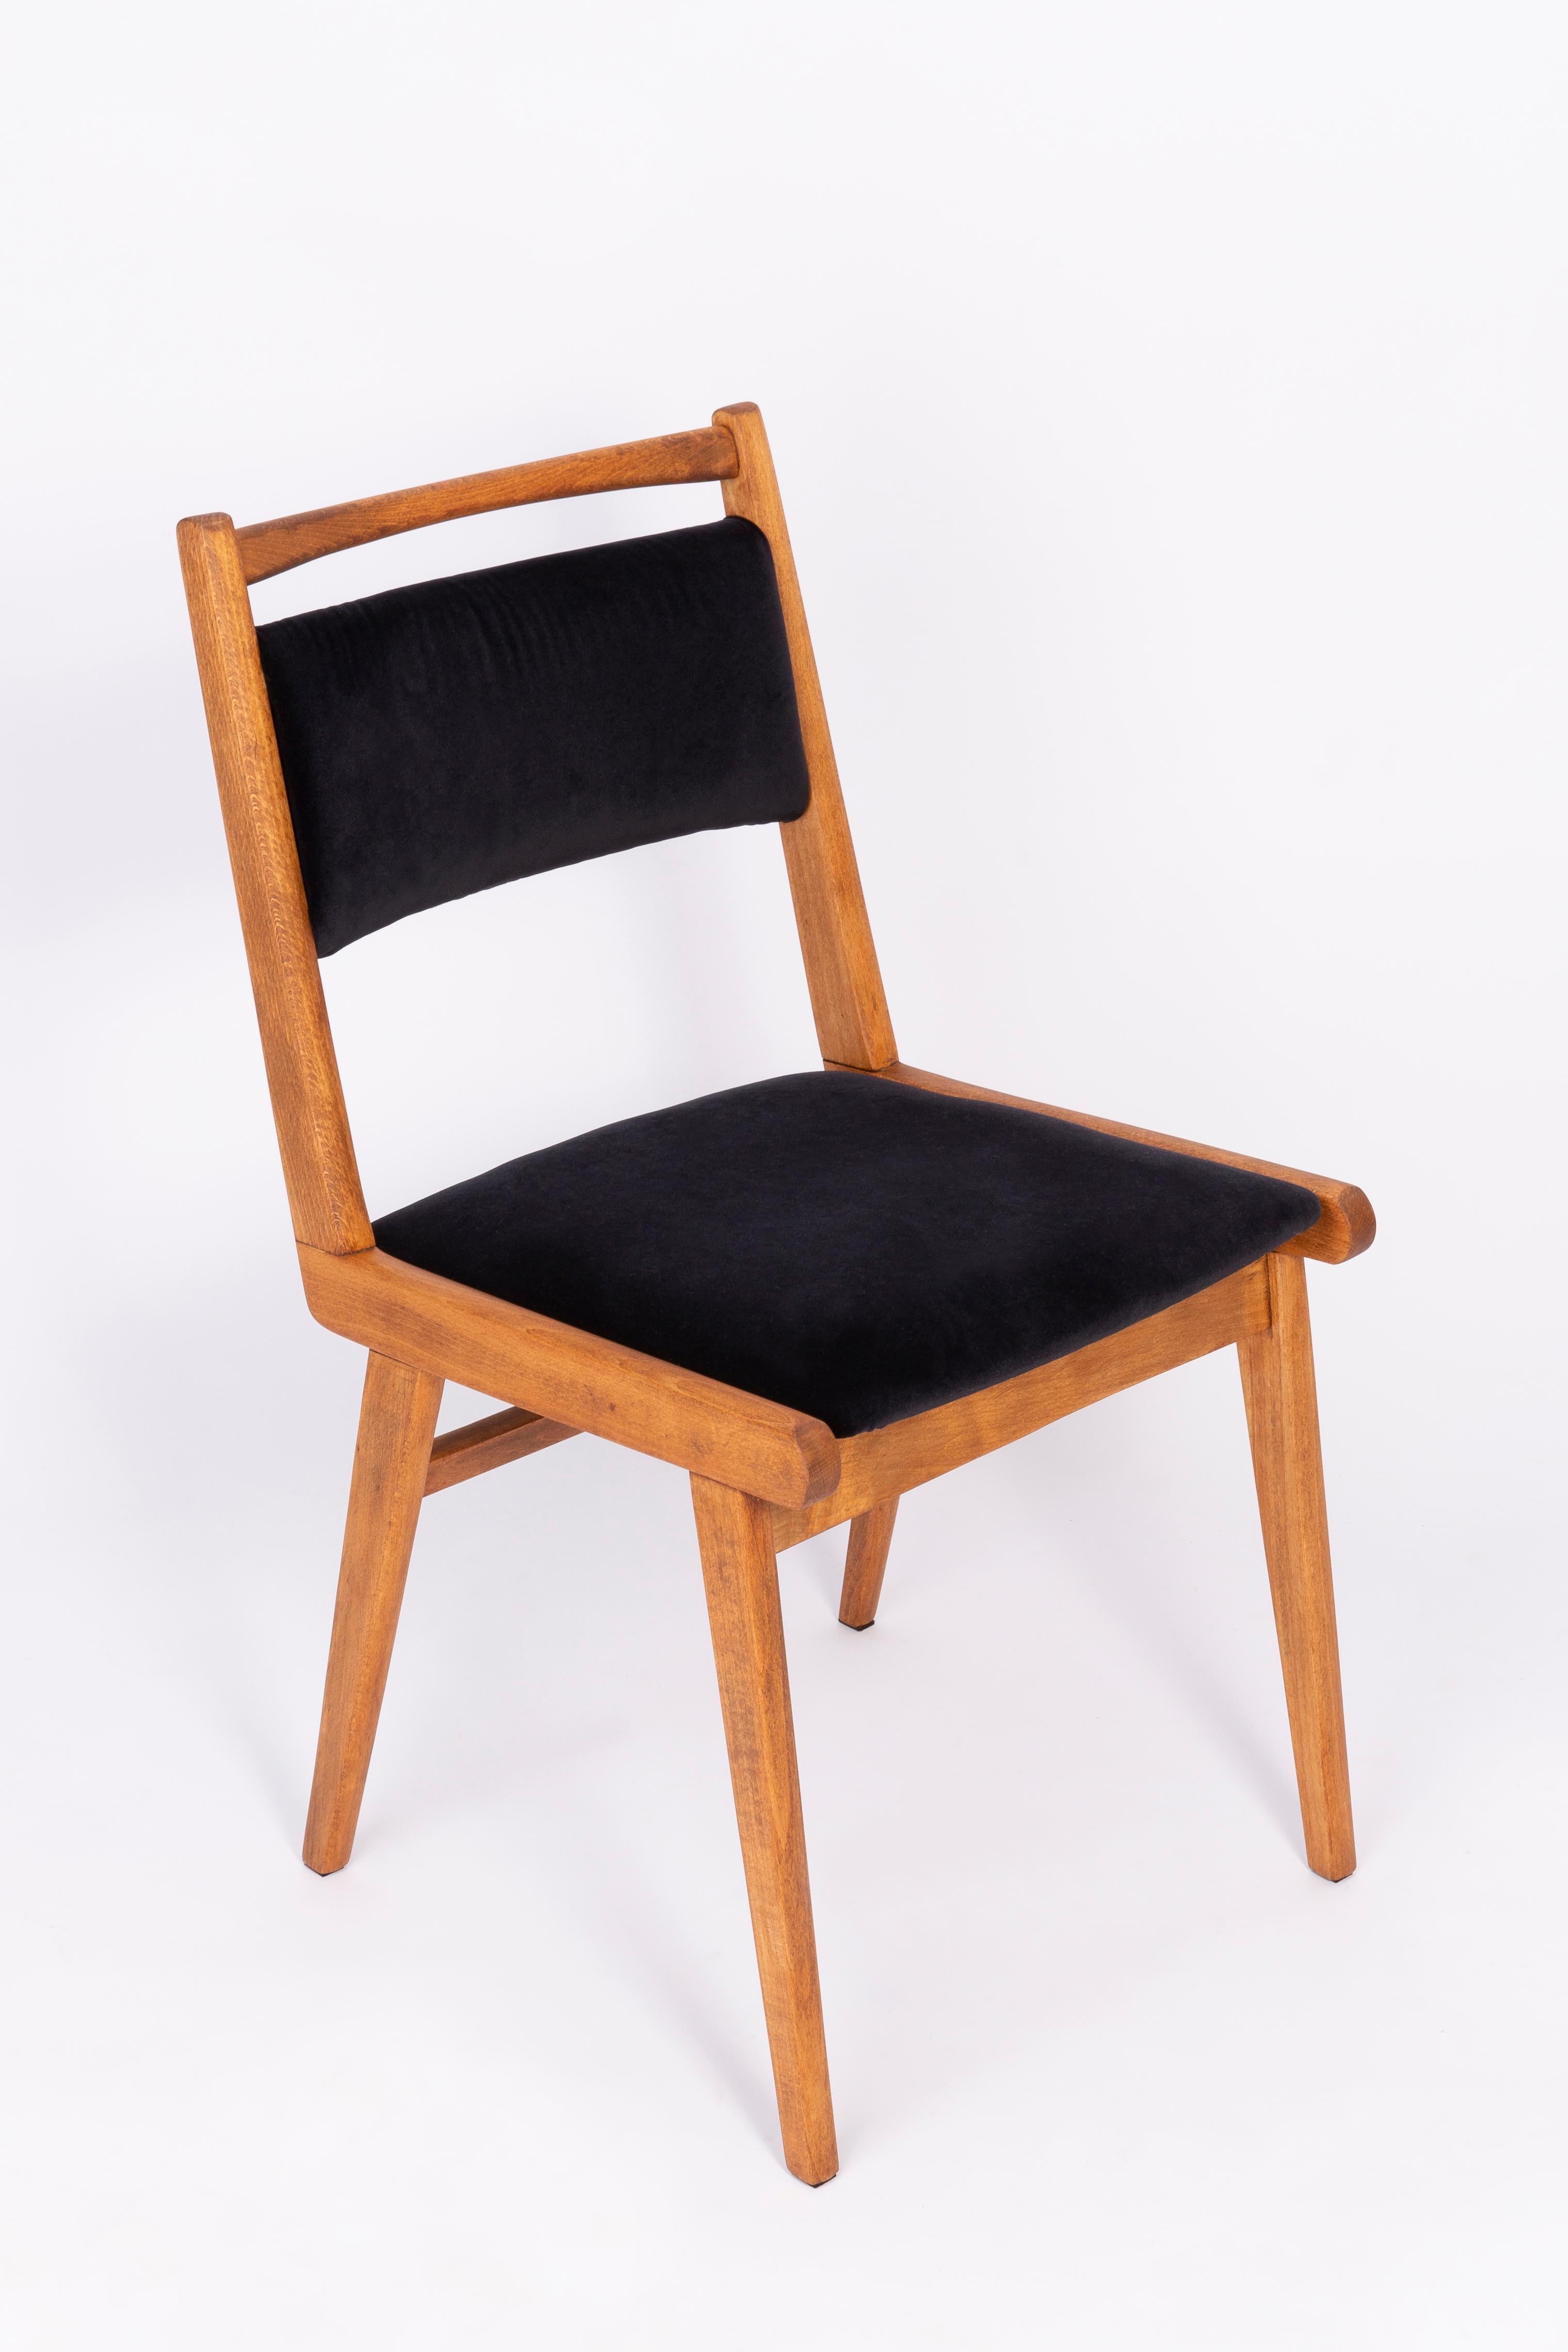 Chairs designed by Prof. Rajmund Halas. It is JAR type model. Made of beechwood. Chairs are after a complete upholstery renovation, the woodwork has been refreshed. Seat and back is dressed in a black, durable and pleasant to the touch velvet